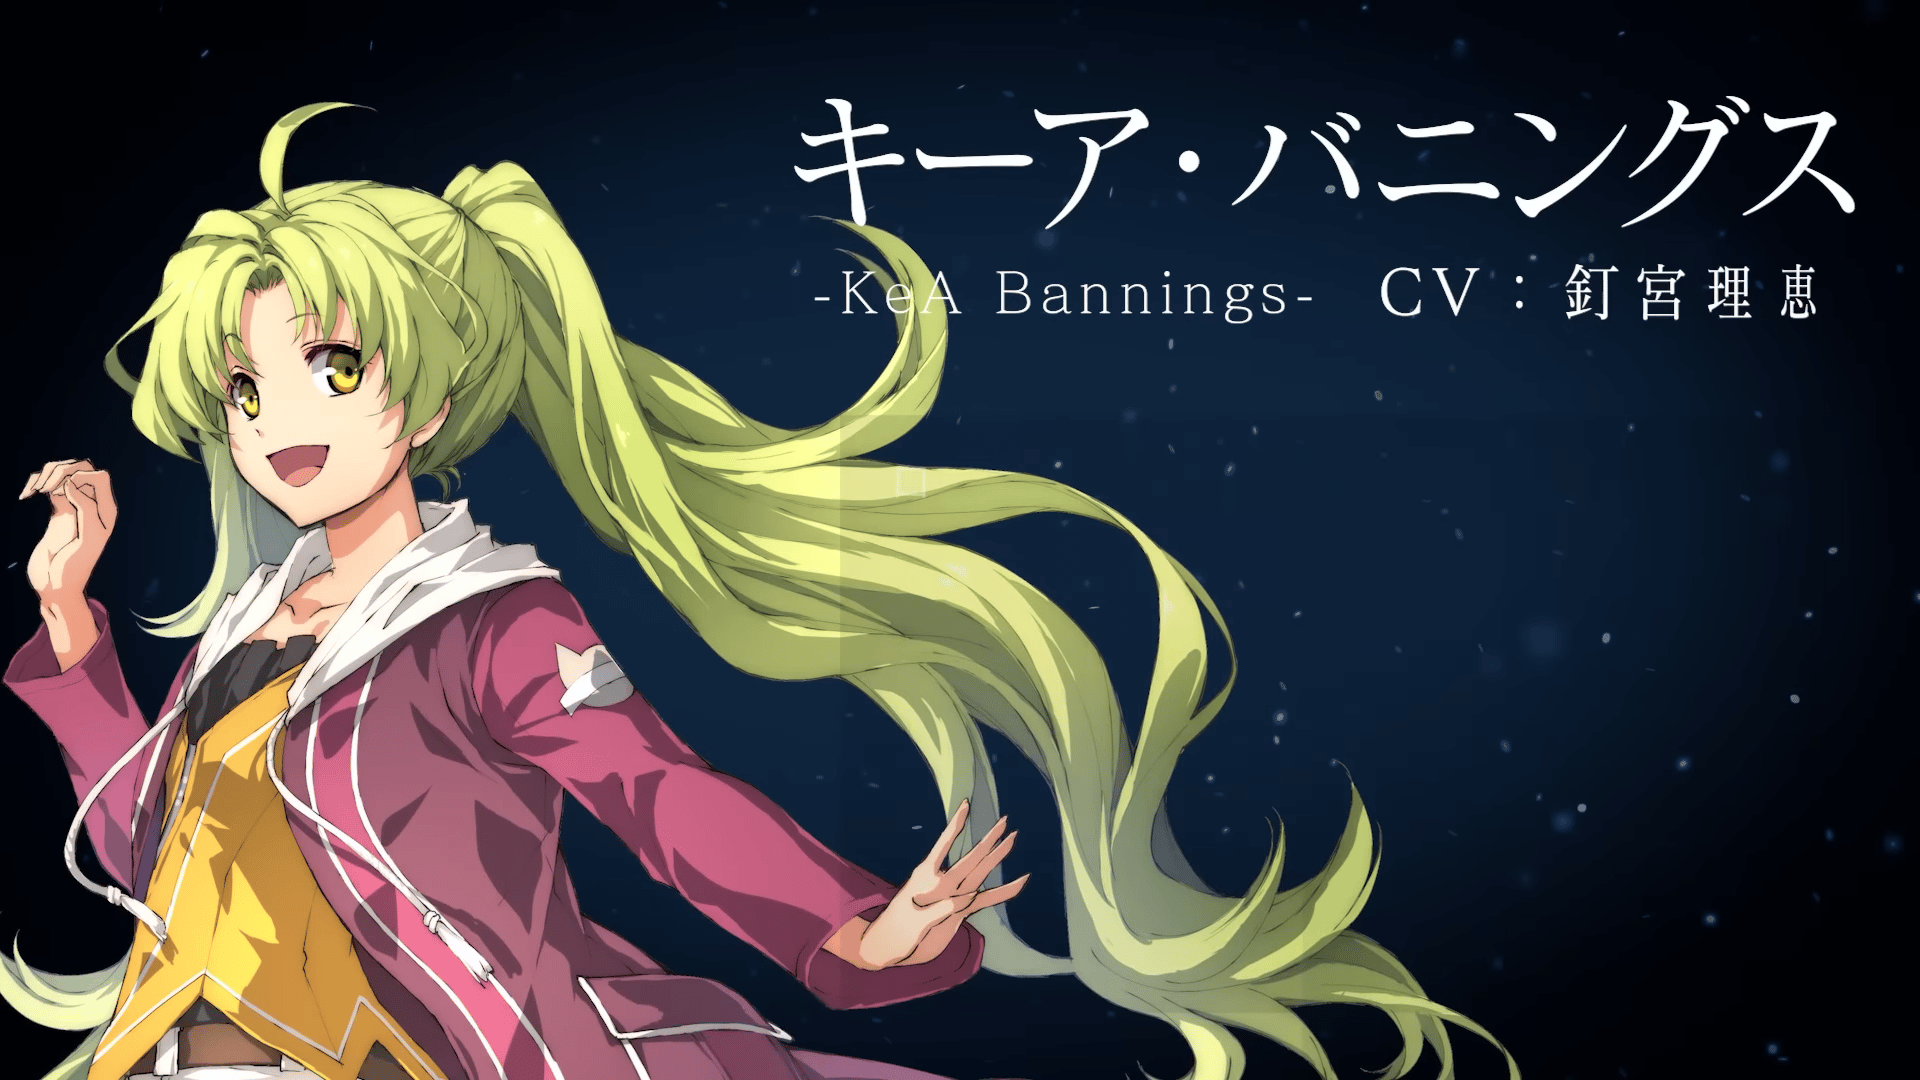 Official Trails Character Video Series Introduces The Spoiler Child; KeA Bannings